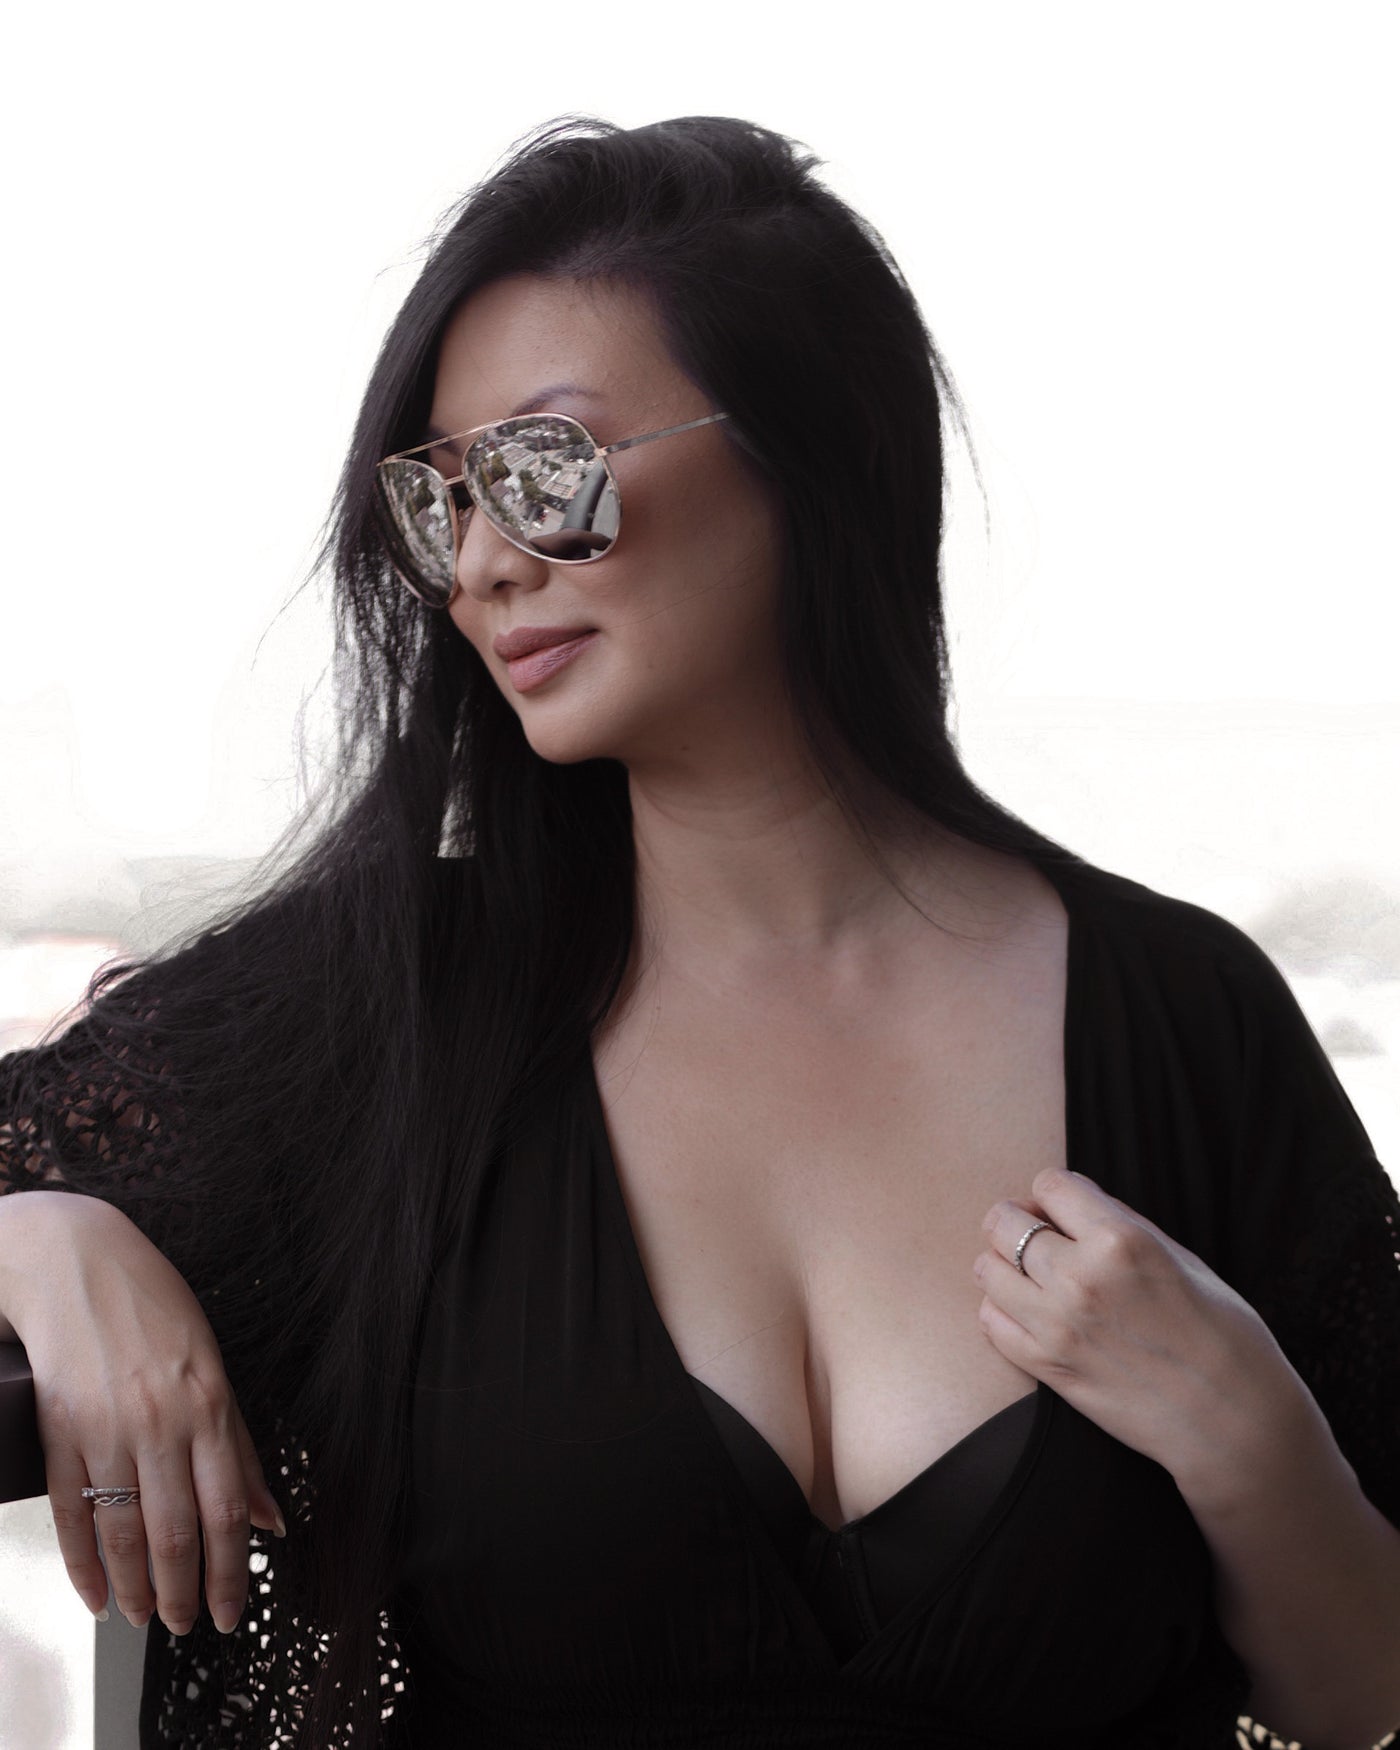 sunglasses, aviator silhouette, wide face sunglasses, rose gold metal frame, mirrored lens, brown ear piece - shown as worn by a women in black, with long dark hair, she is looking off to the side with her arm resting on a balcony railing